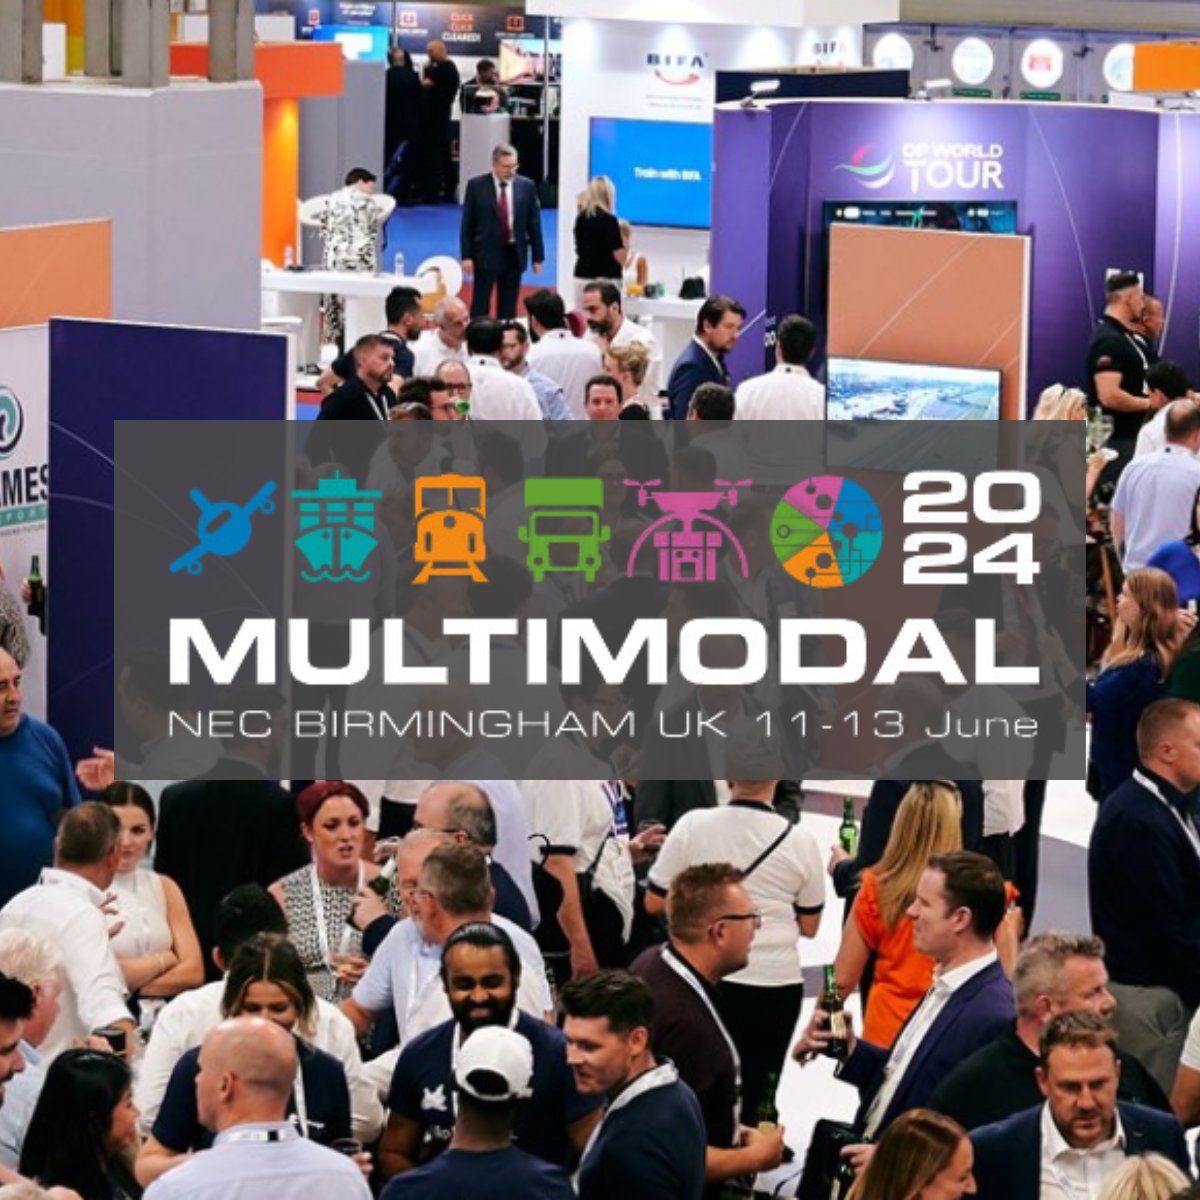 One of the things we are most excited about in 2024 is attending and exhibiting at Multimodal once again. We would love you to come and visit us, registration couldn't be simpler: eu1.hubs.ly/H06NBDh0 The early bird catches the worm 🐛